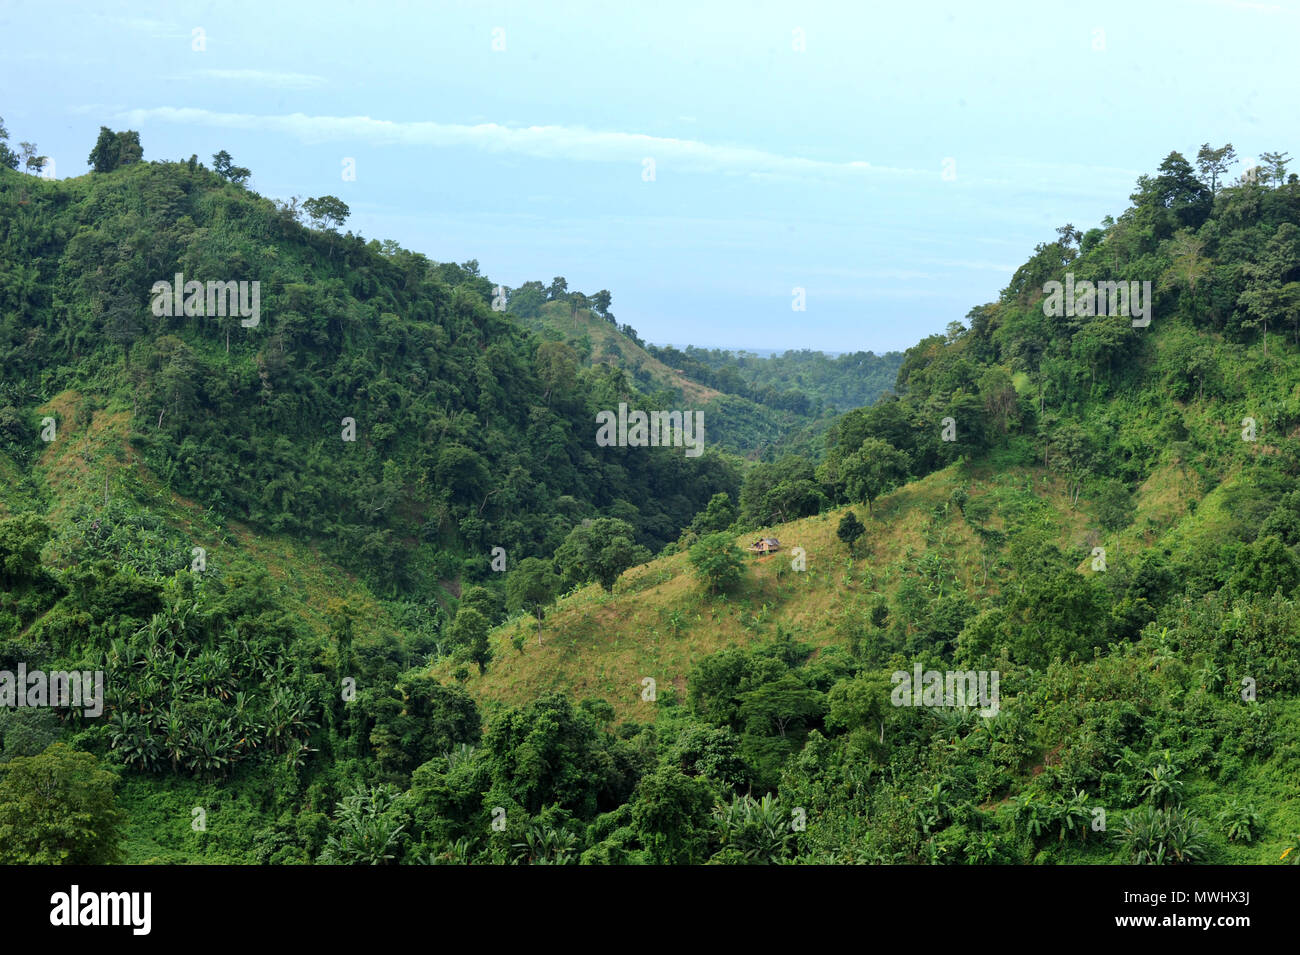 Khagrachari, Bangladesh - October 17, 2011: The Landscape view of Khagrachari is regarded as one of the most attractive travel destinations in Banglad Stock Photo